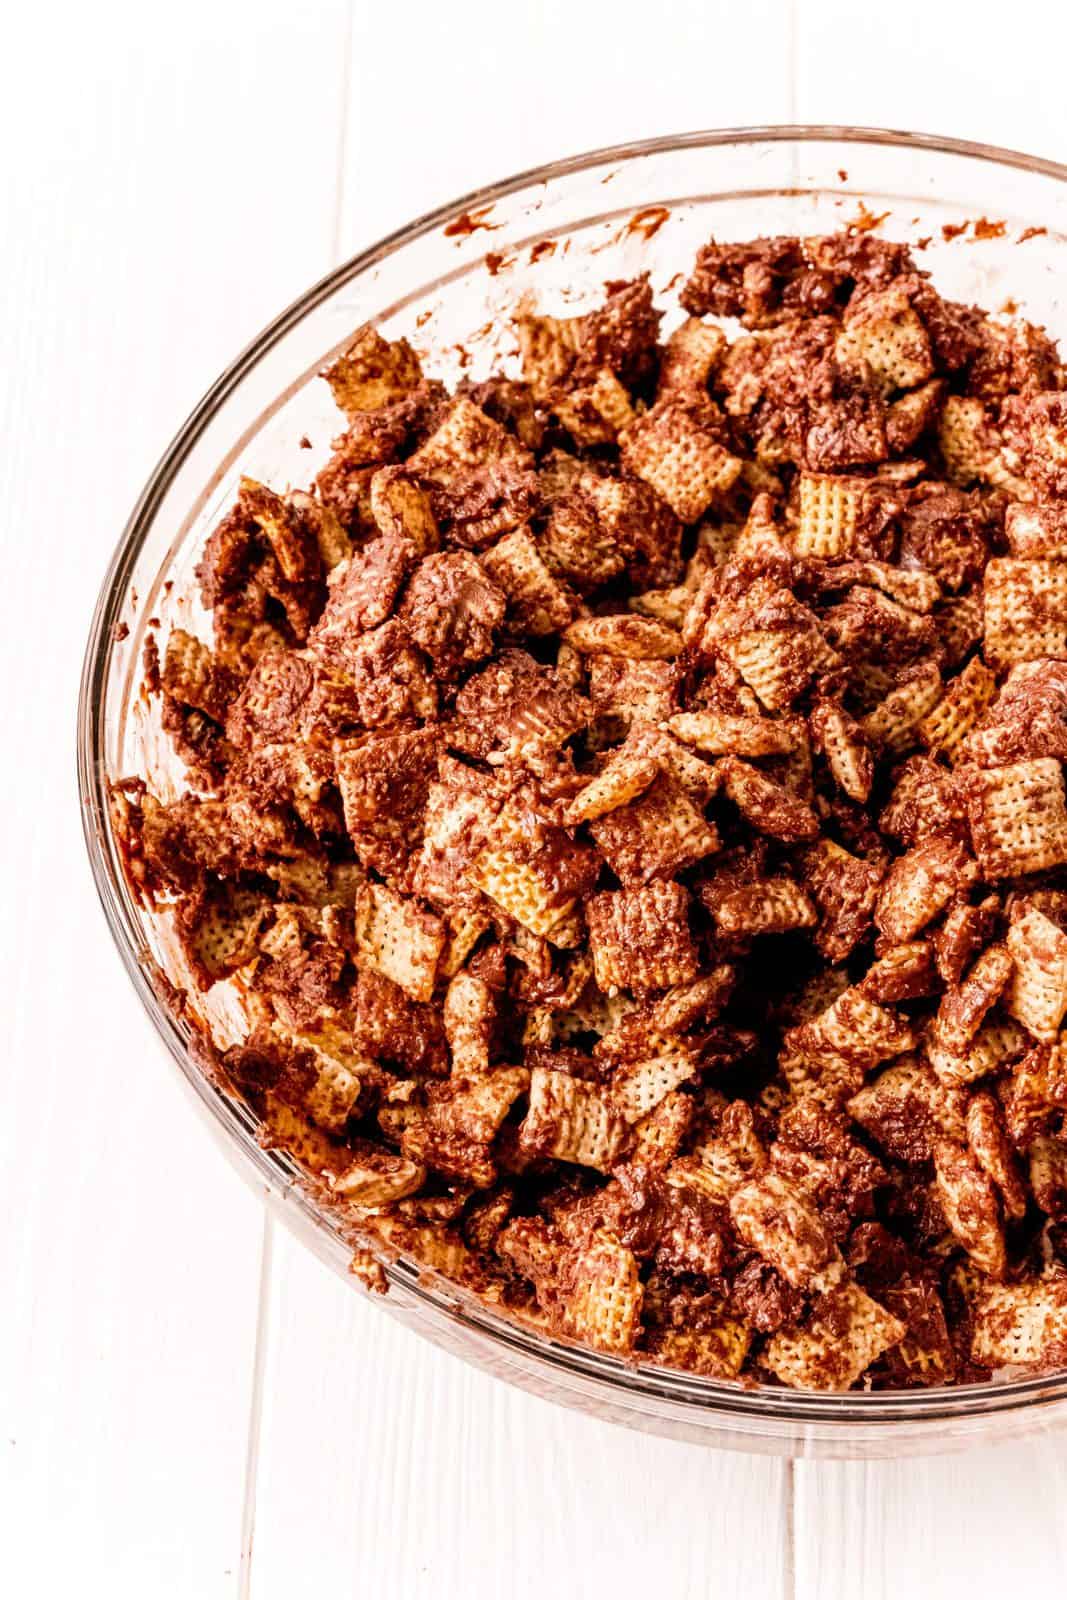 Chex cereal in bowl covered in nutella and chocolate mixture.